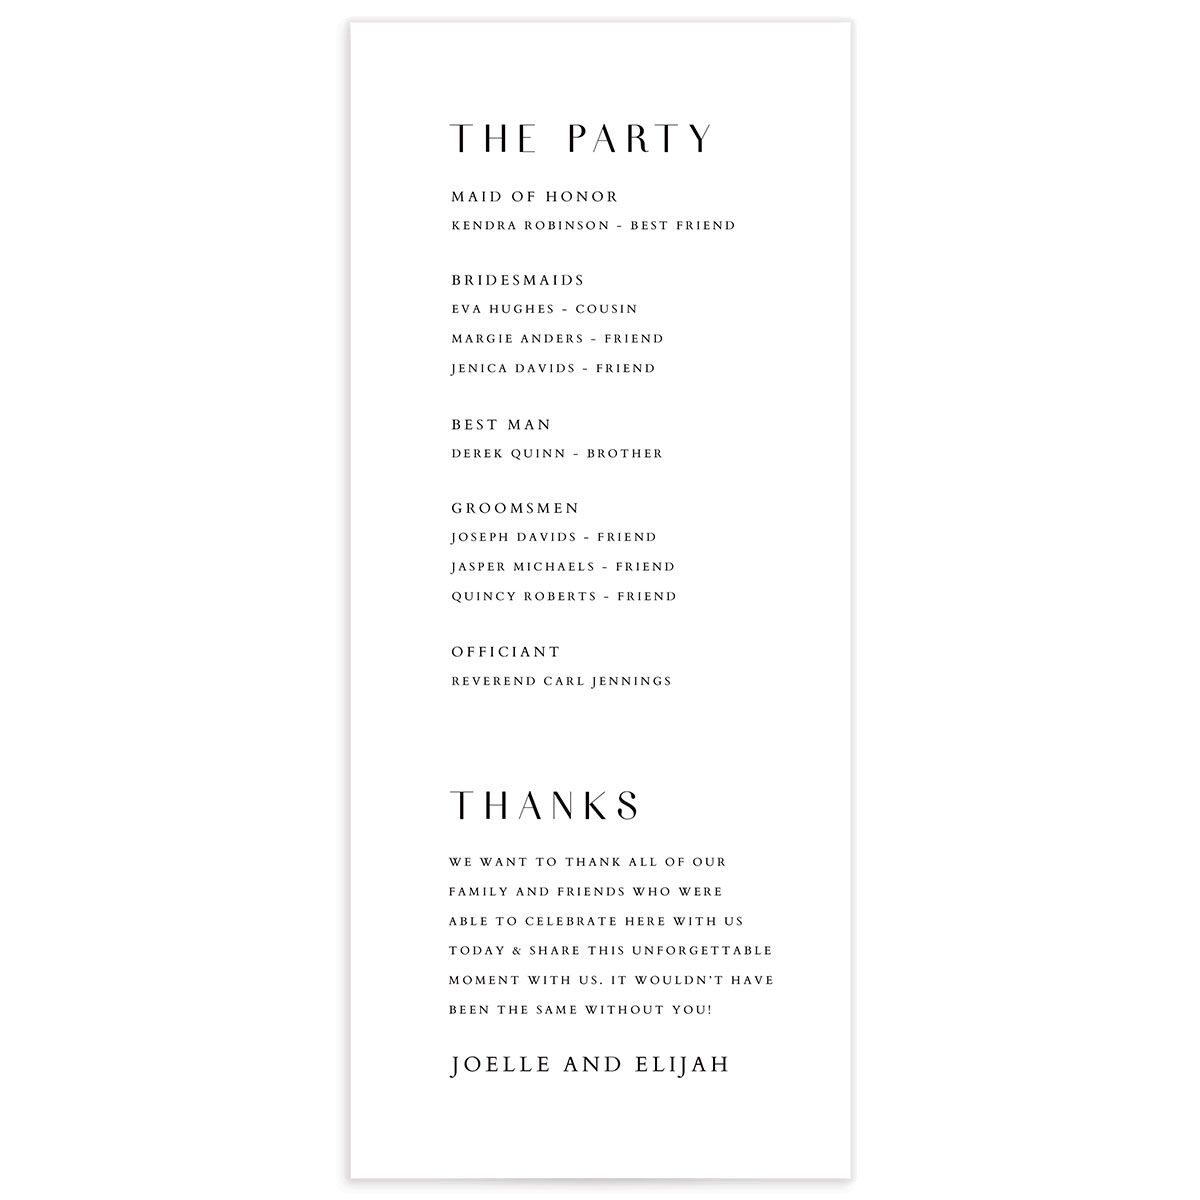 Minimal Lines Wedding Programs back in Pure White